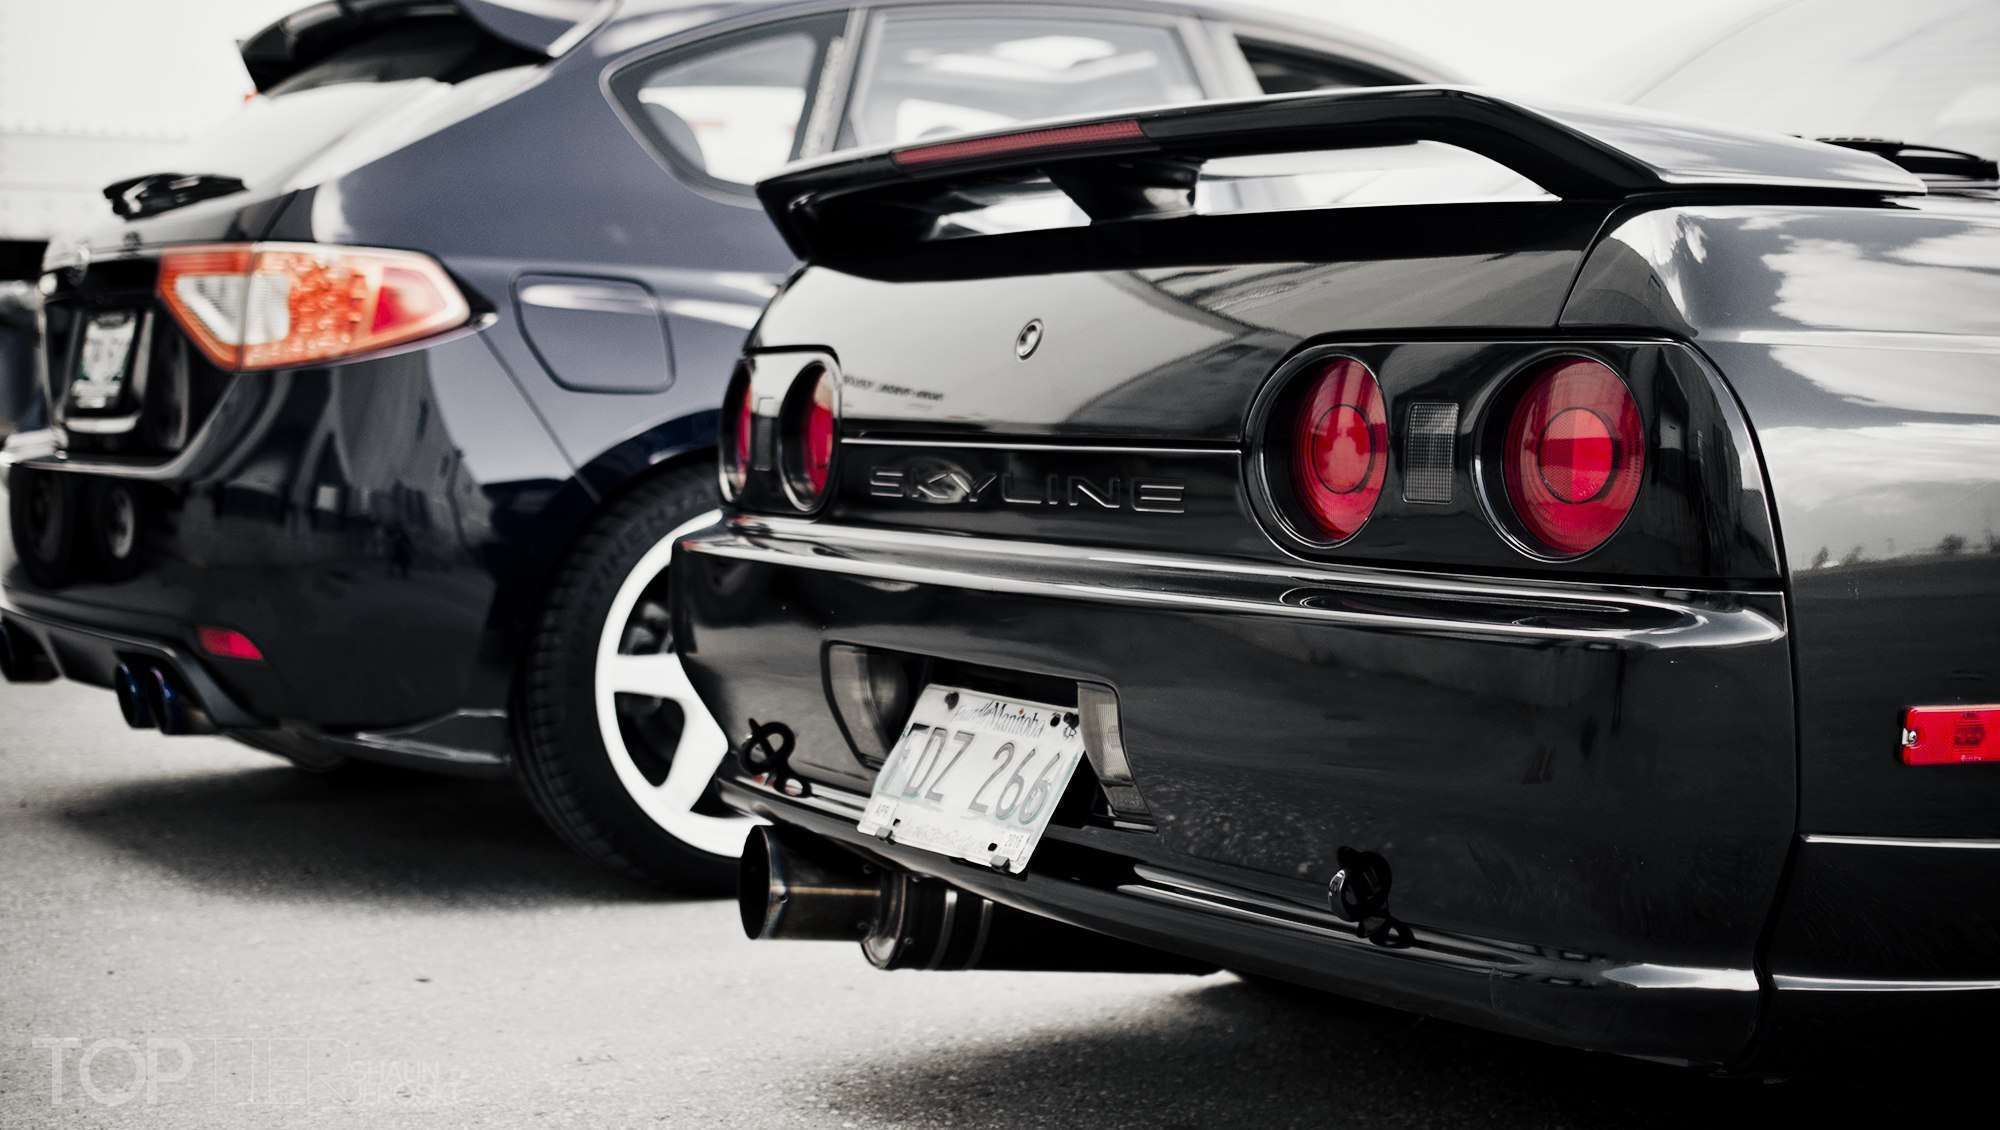 Nissan Skyline R32 Hd Wallpapers Hd Car Backgrounds